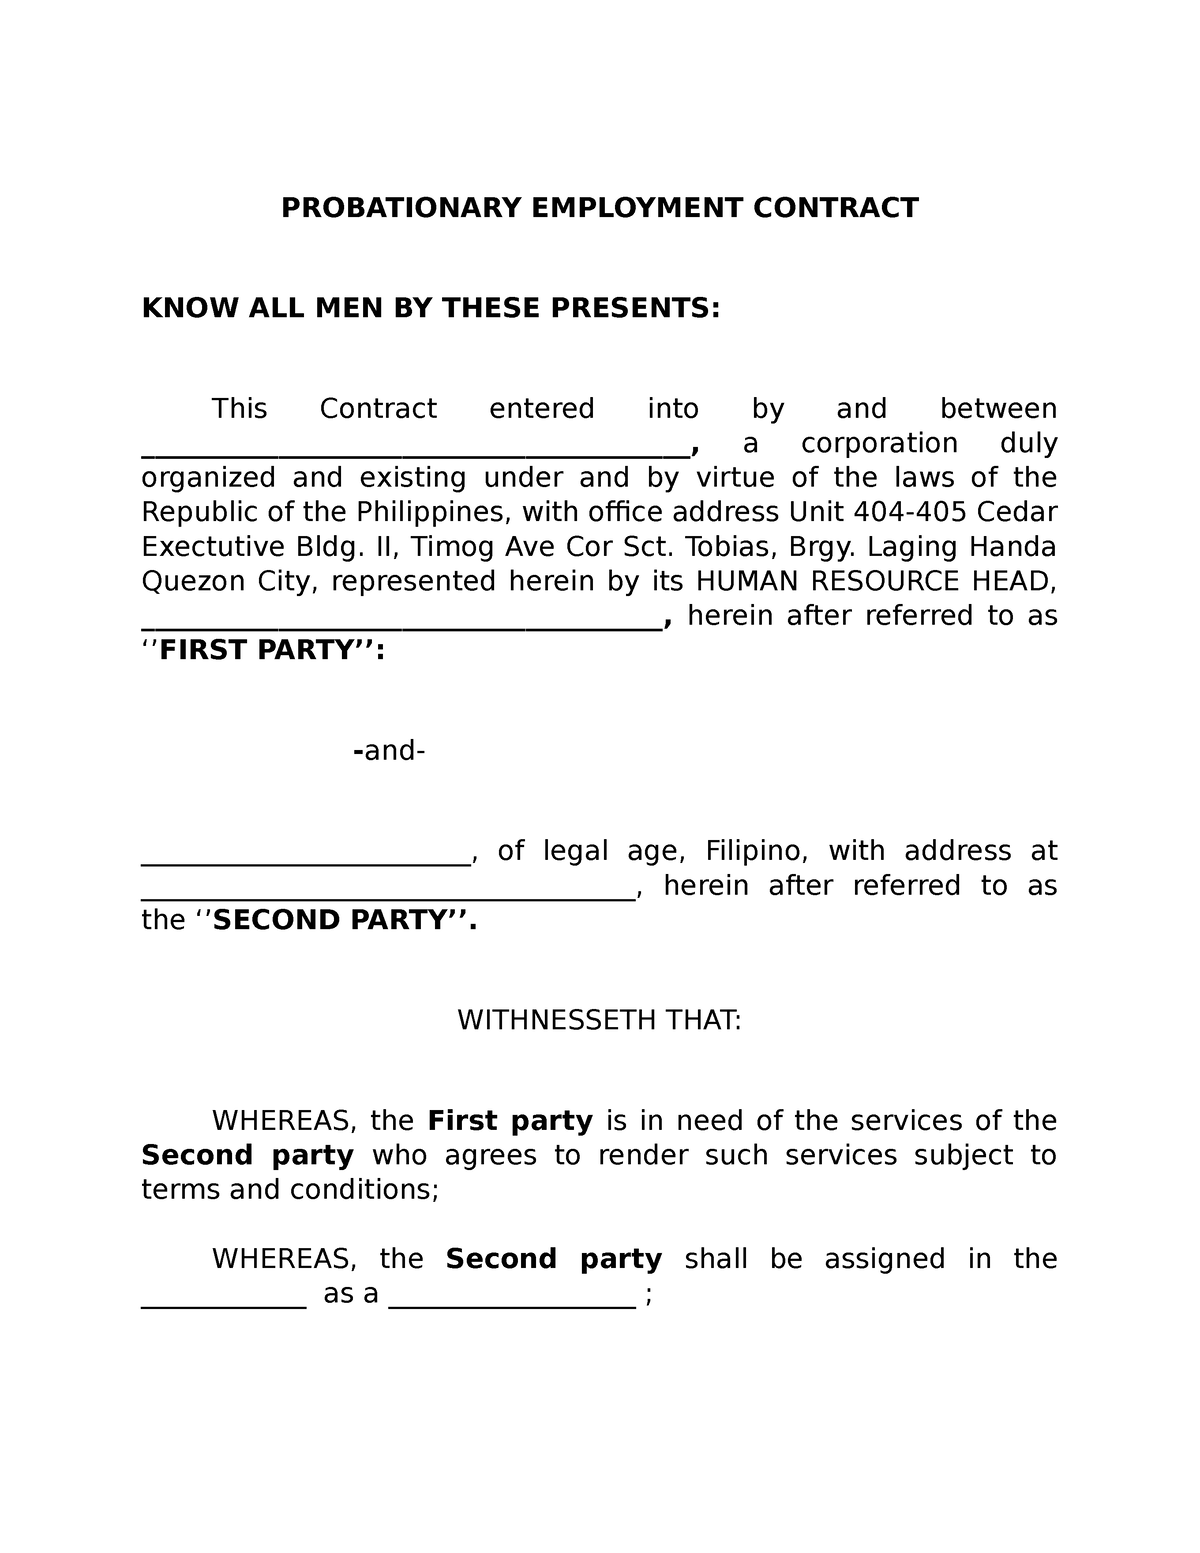 Probationary Contract Employment Drafted PROBATIONARY EMPLOYMENT